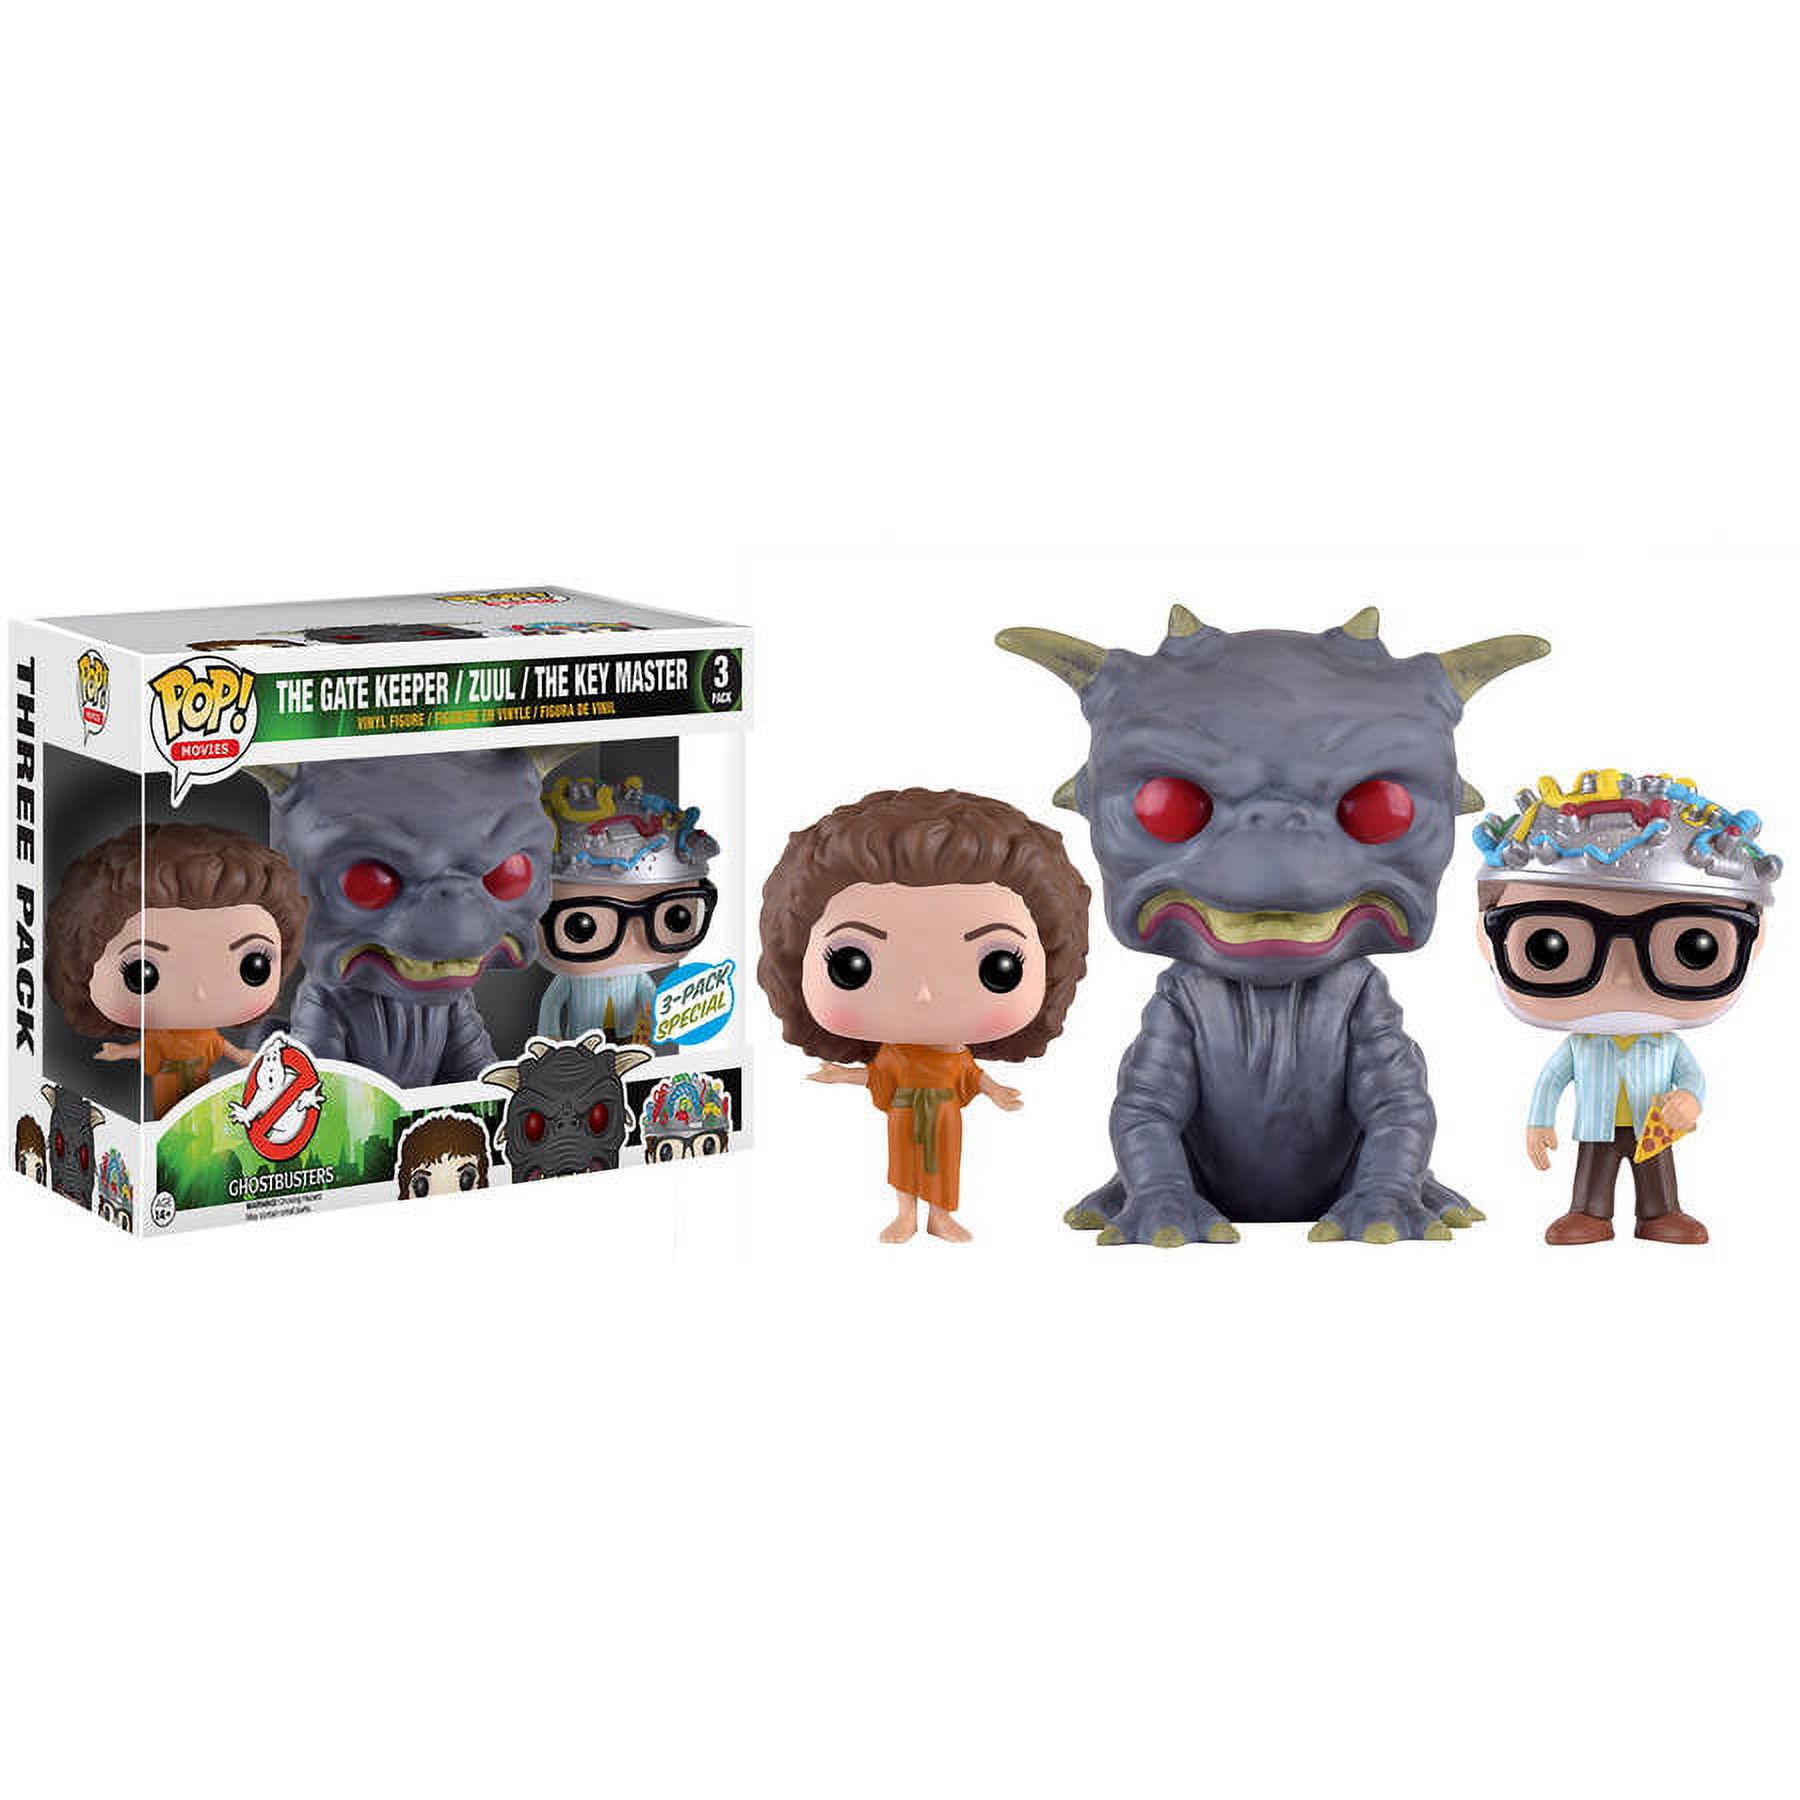 POP Movies: Classic Ghostbusters 3 Pack Walmart Exclusive, The Gatekeeper, Zuul, The Key Master - image 1 of 6